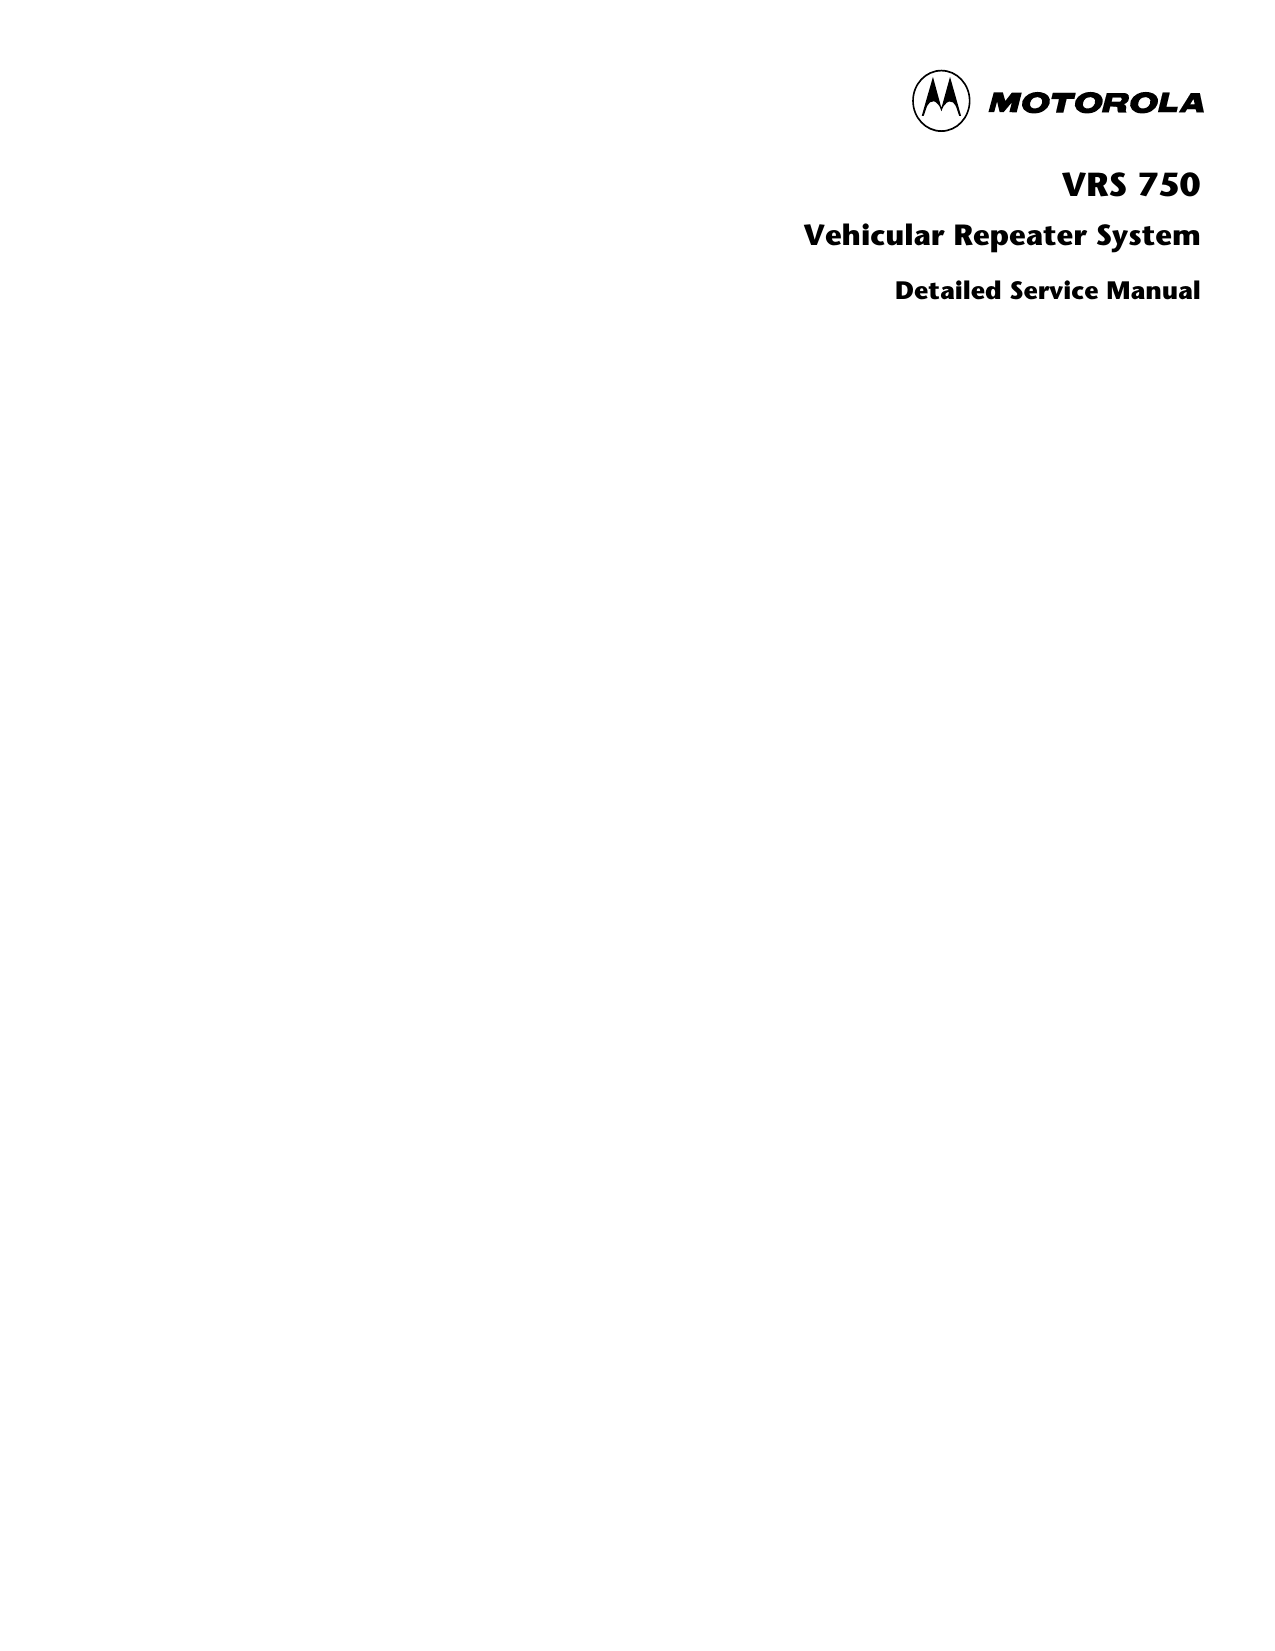  1 VRS 750 Vehicular Repeater System Detailed Service Manual